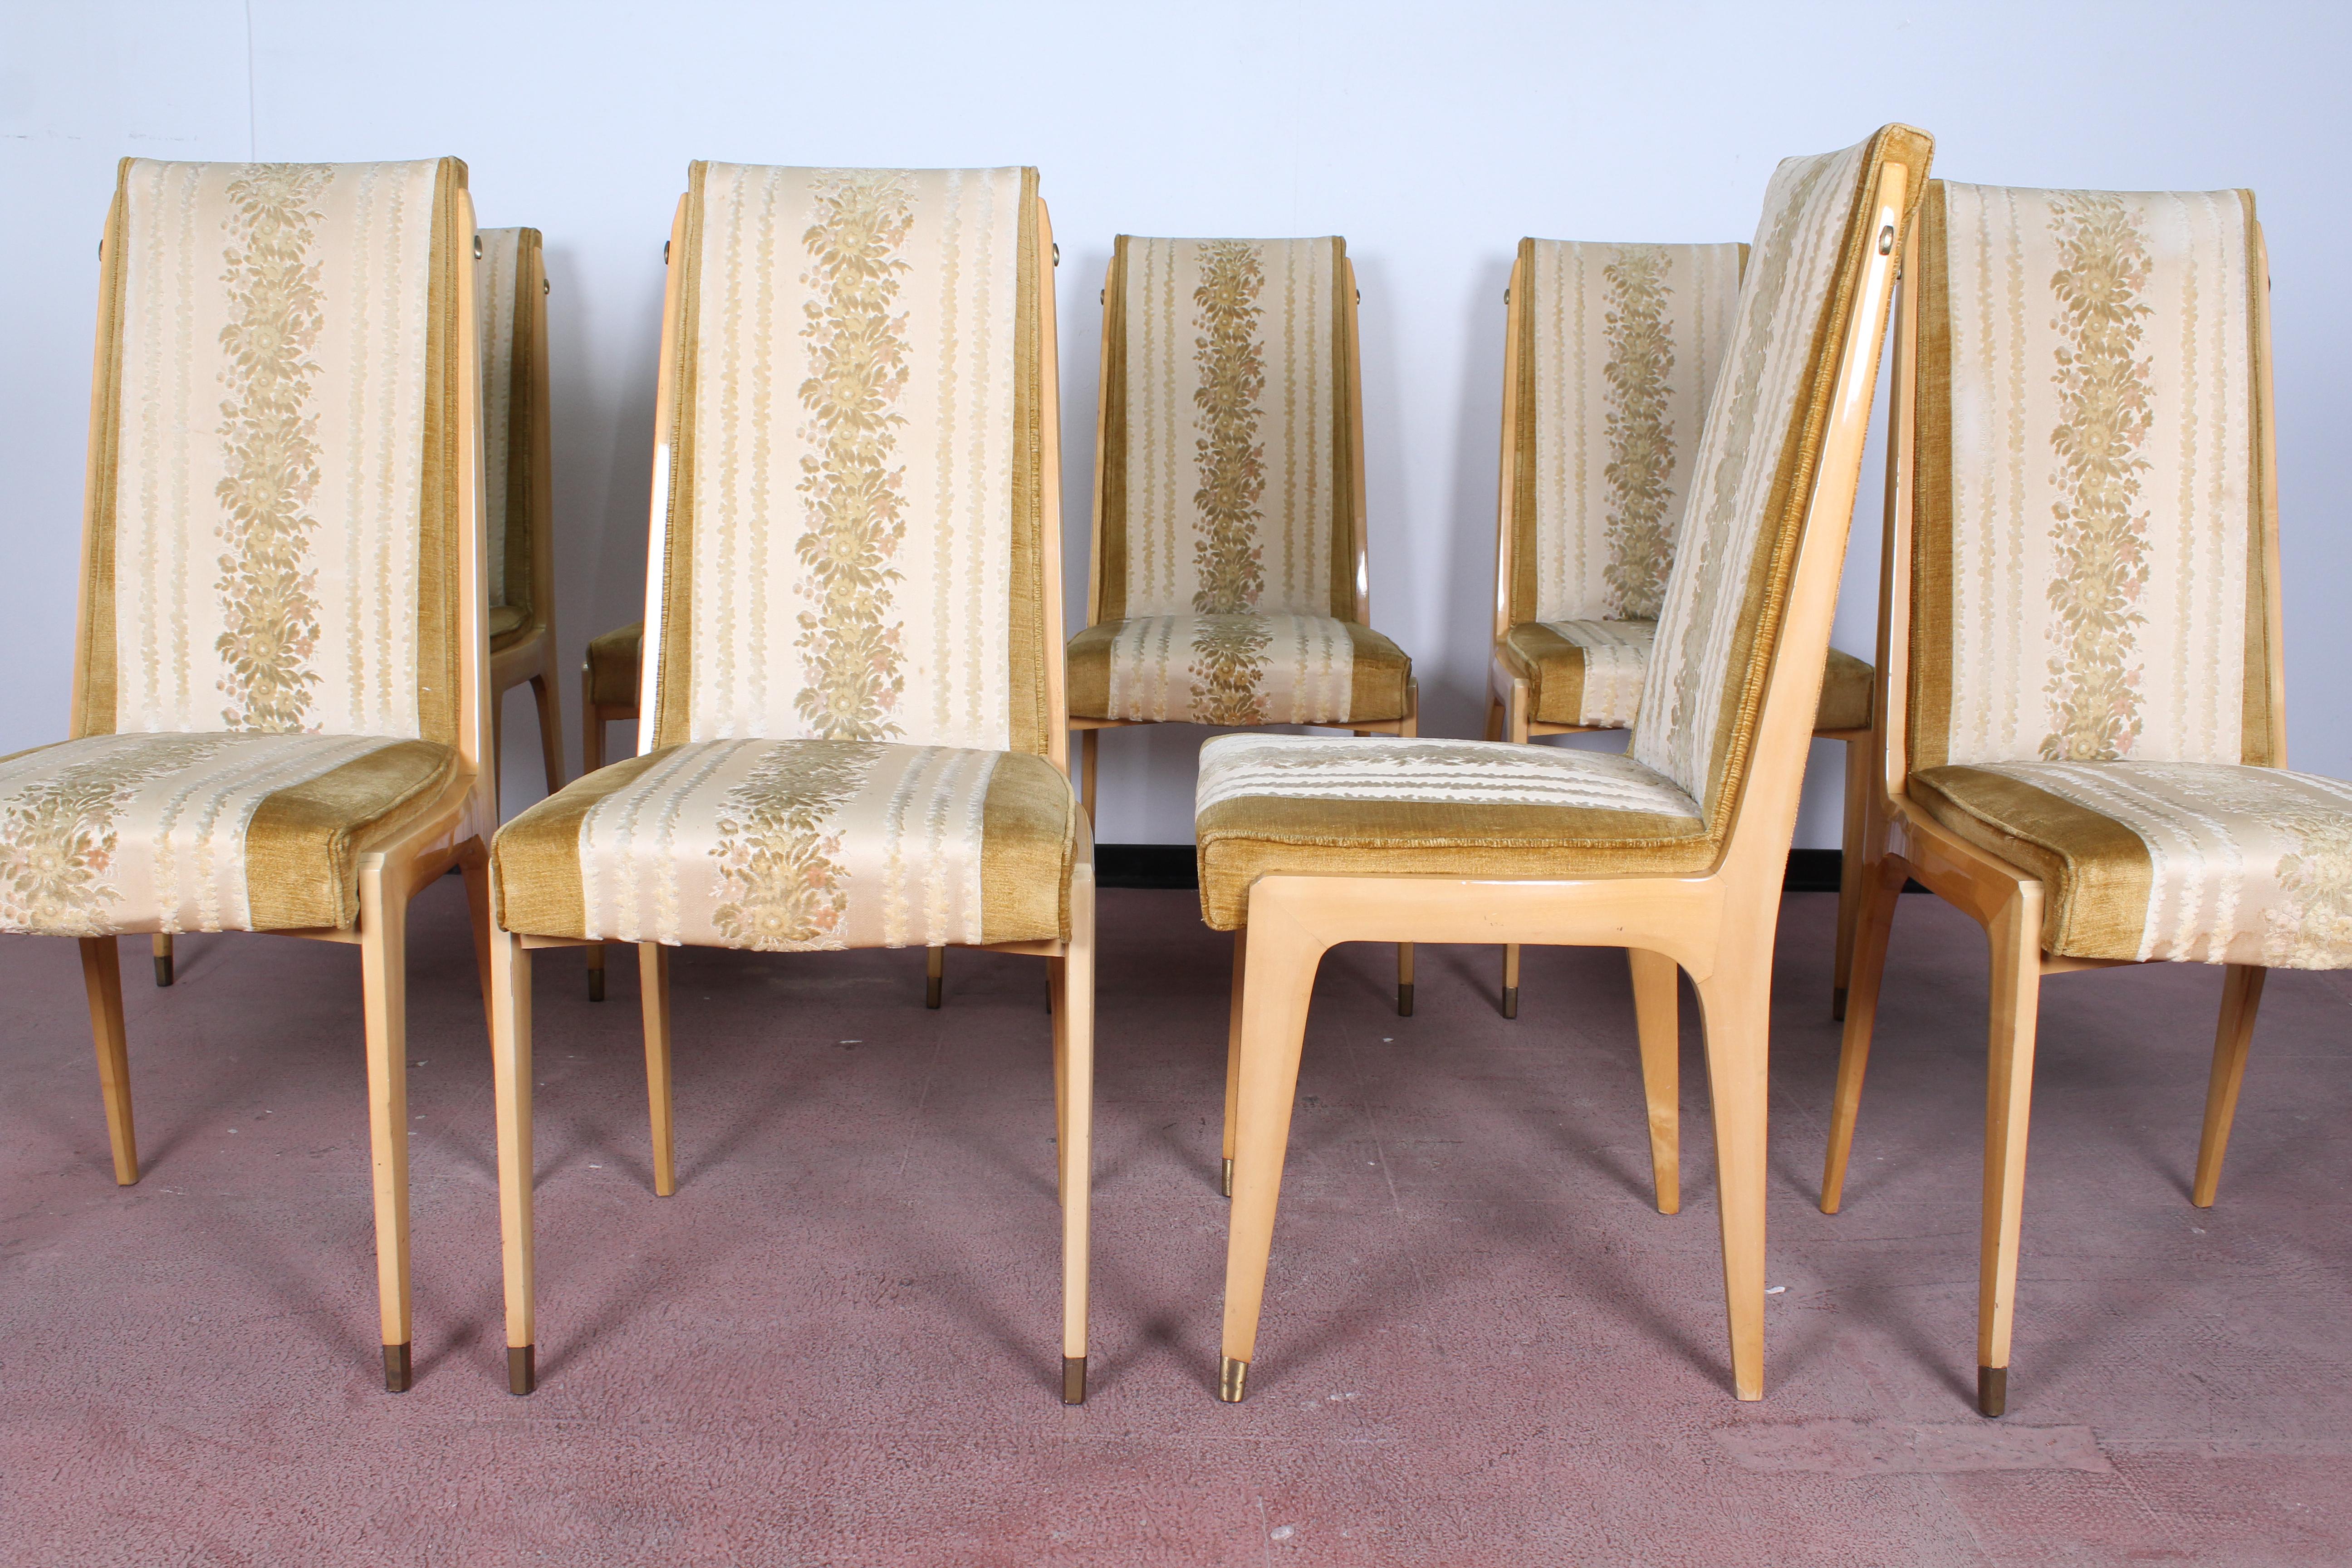 Set of eight dining table chairs by Vittorio Dassi, Italy, 1950 circa.
The wooden frame, which is very typical of the design of furniture by Dassi, it's in maple, with brass feet.
Measures: Height 100 cm, seat width 50 cm, seat depth 47 cm, seat